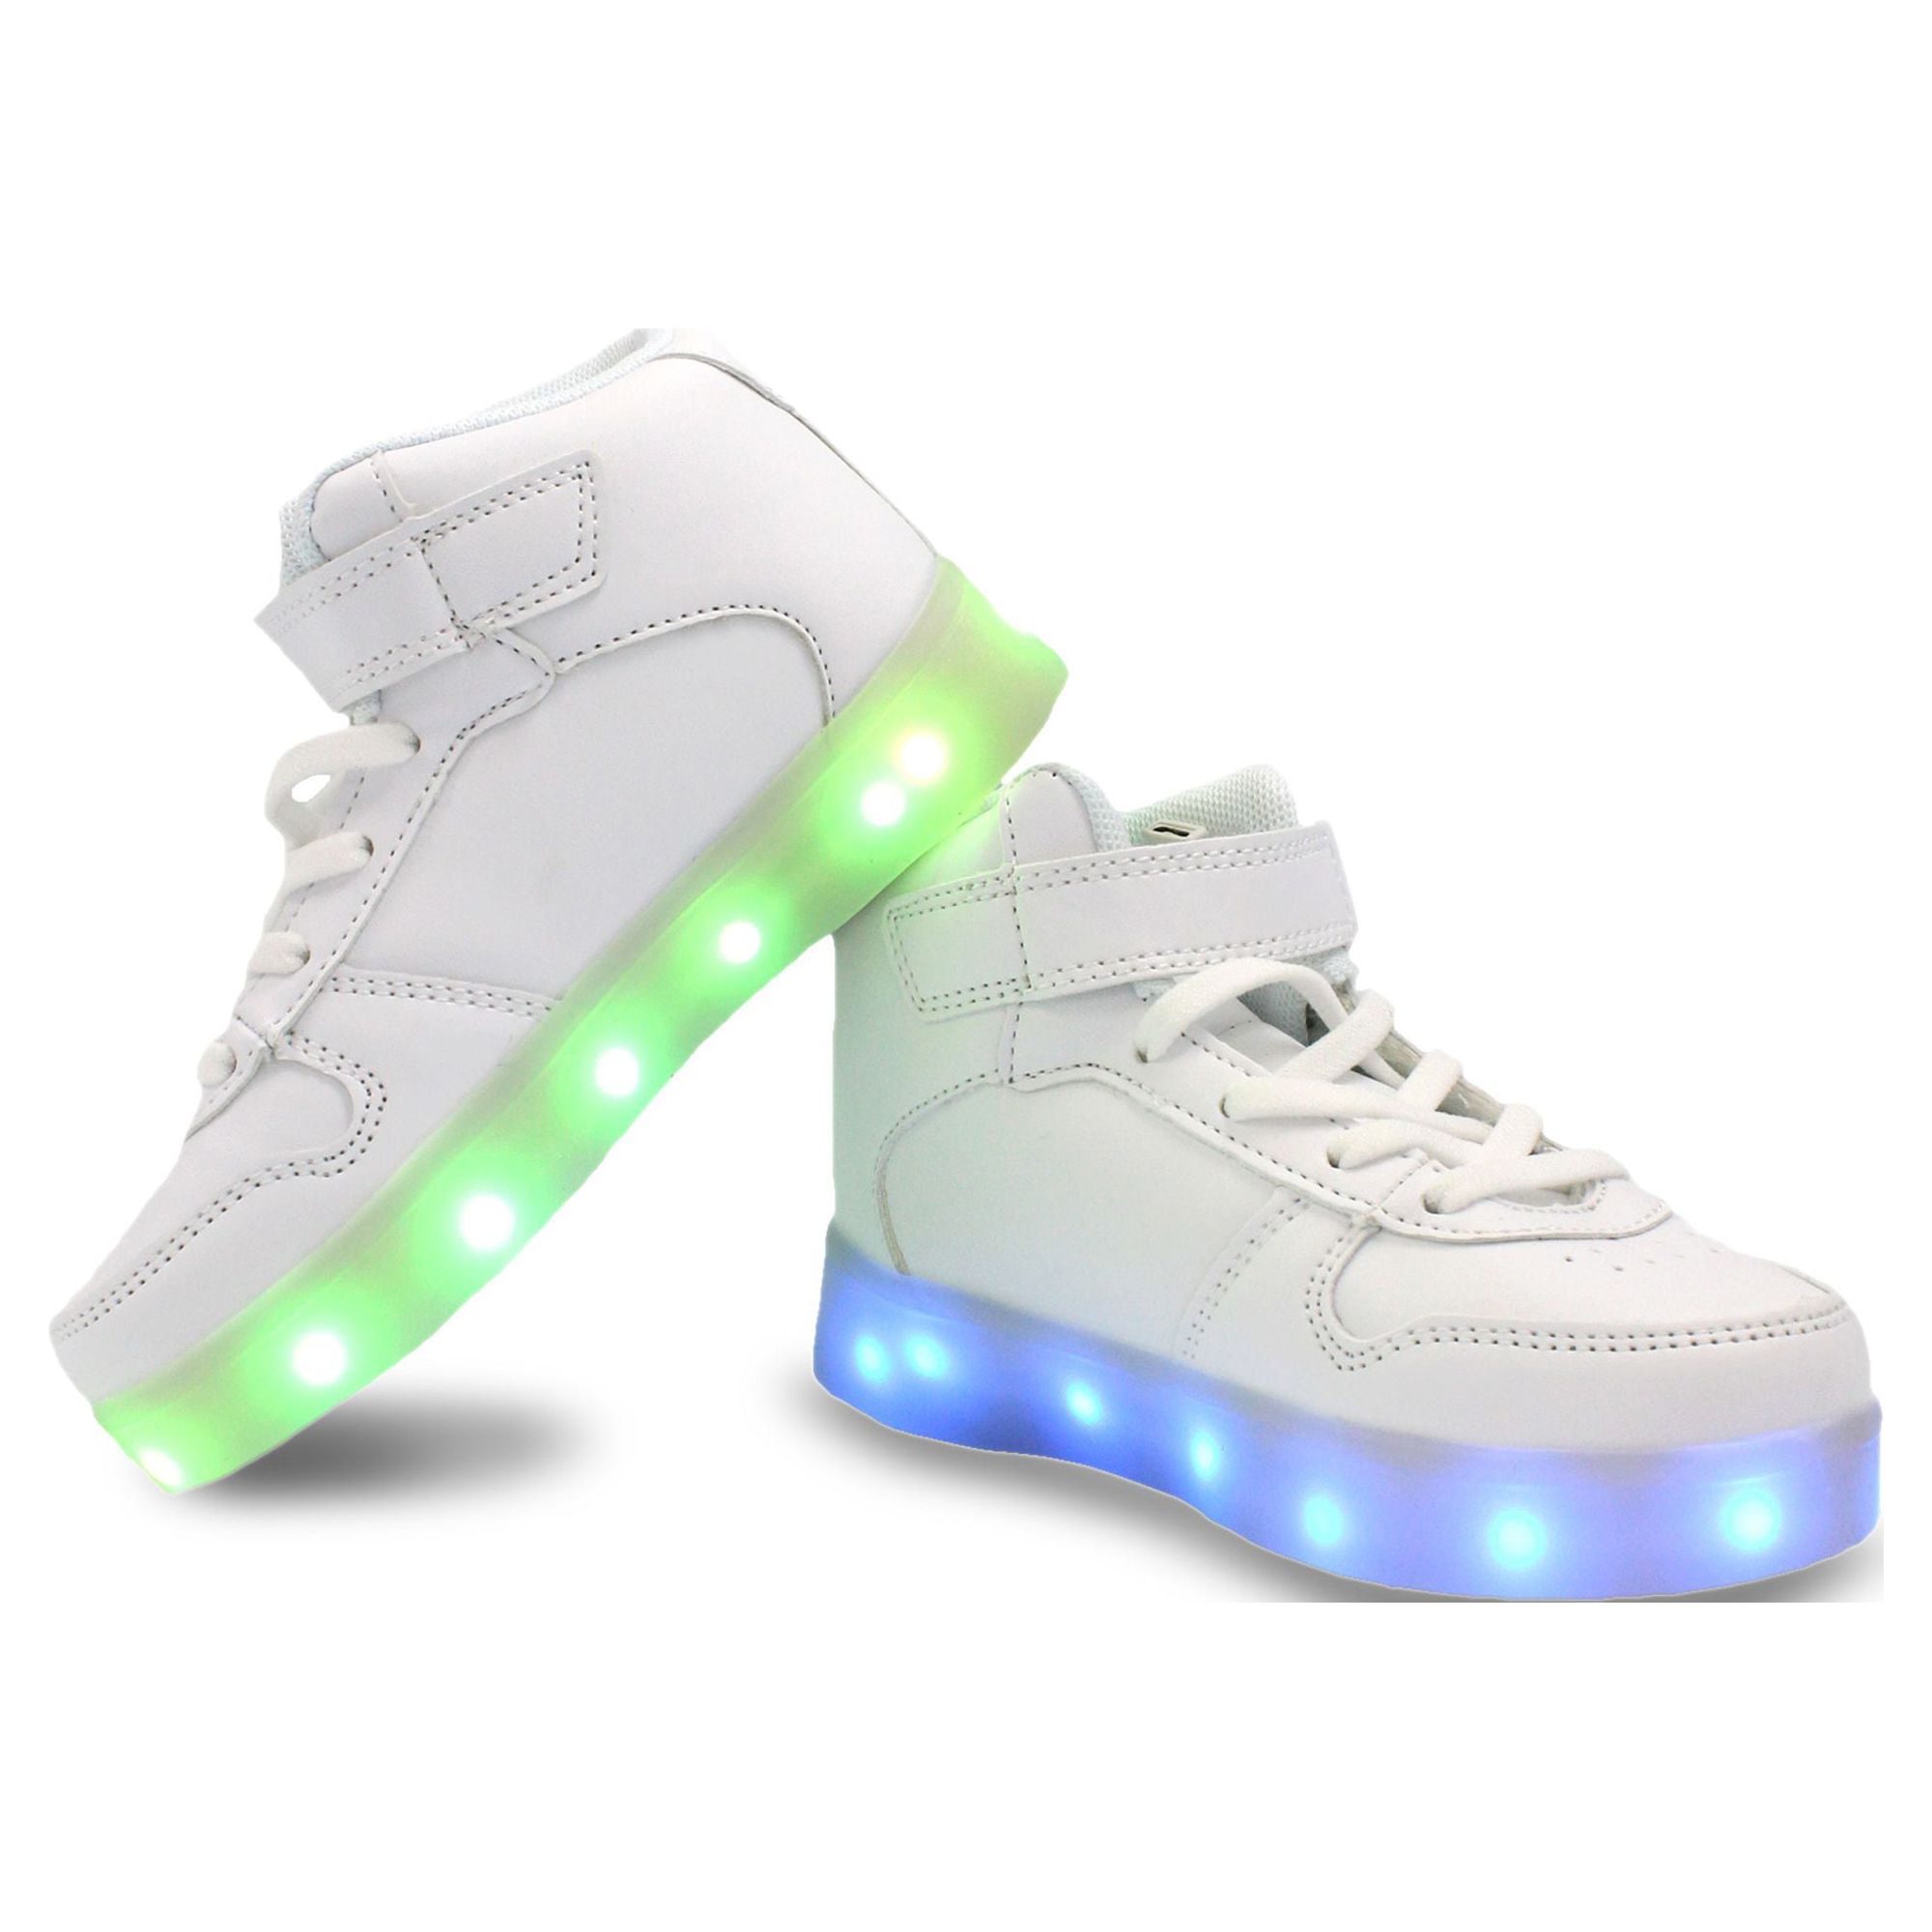 Family Smiles LED Light Up Sneakers Kids High Top Boys Girls Unisex Strap Lace Up Shoes White Toddler US 10.5 / EU 27.5 - image 5 of 7